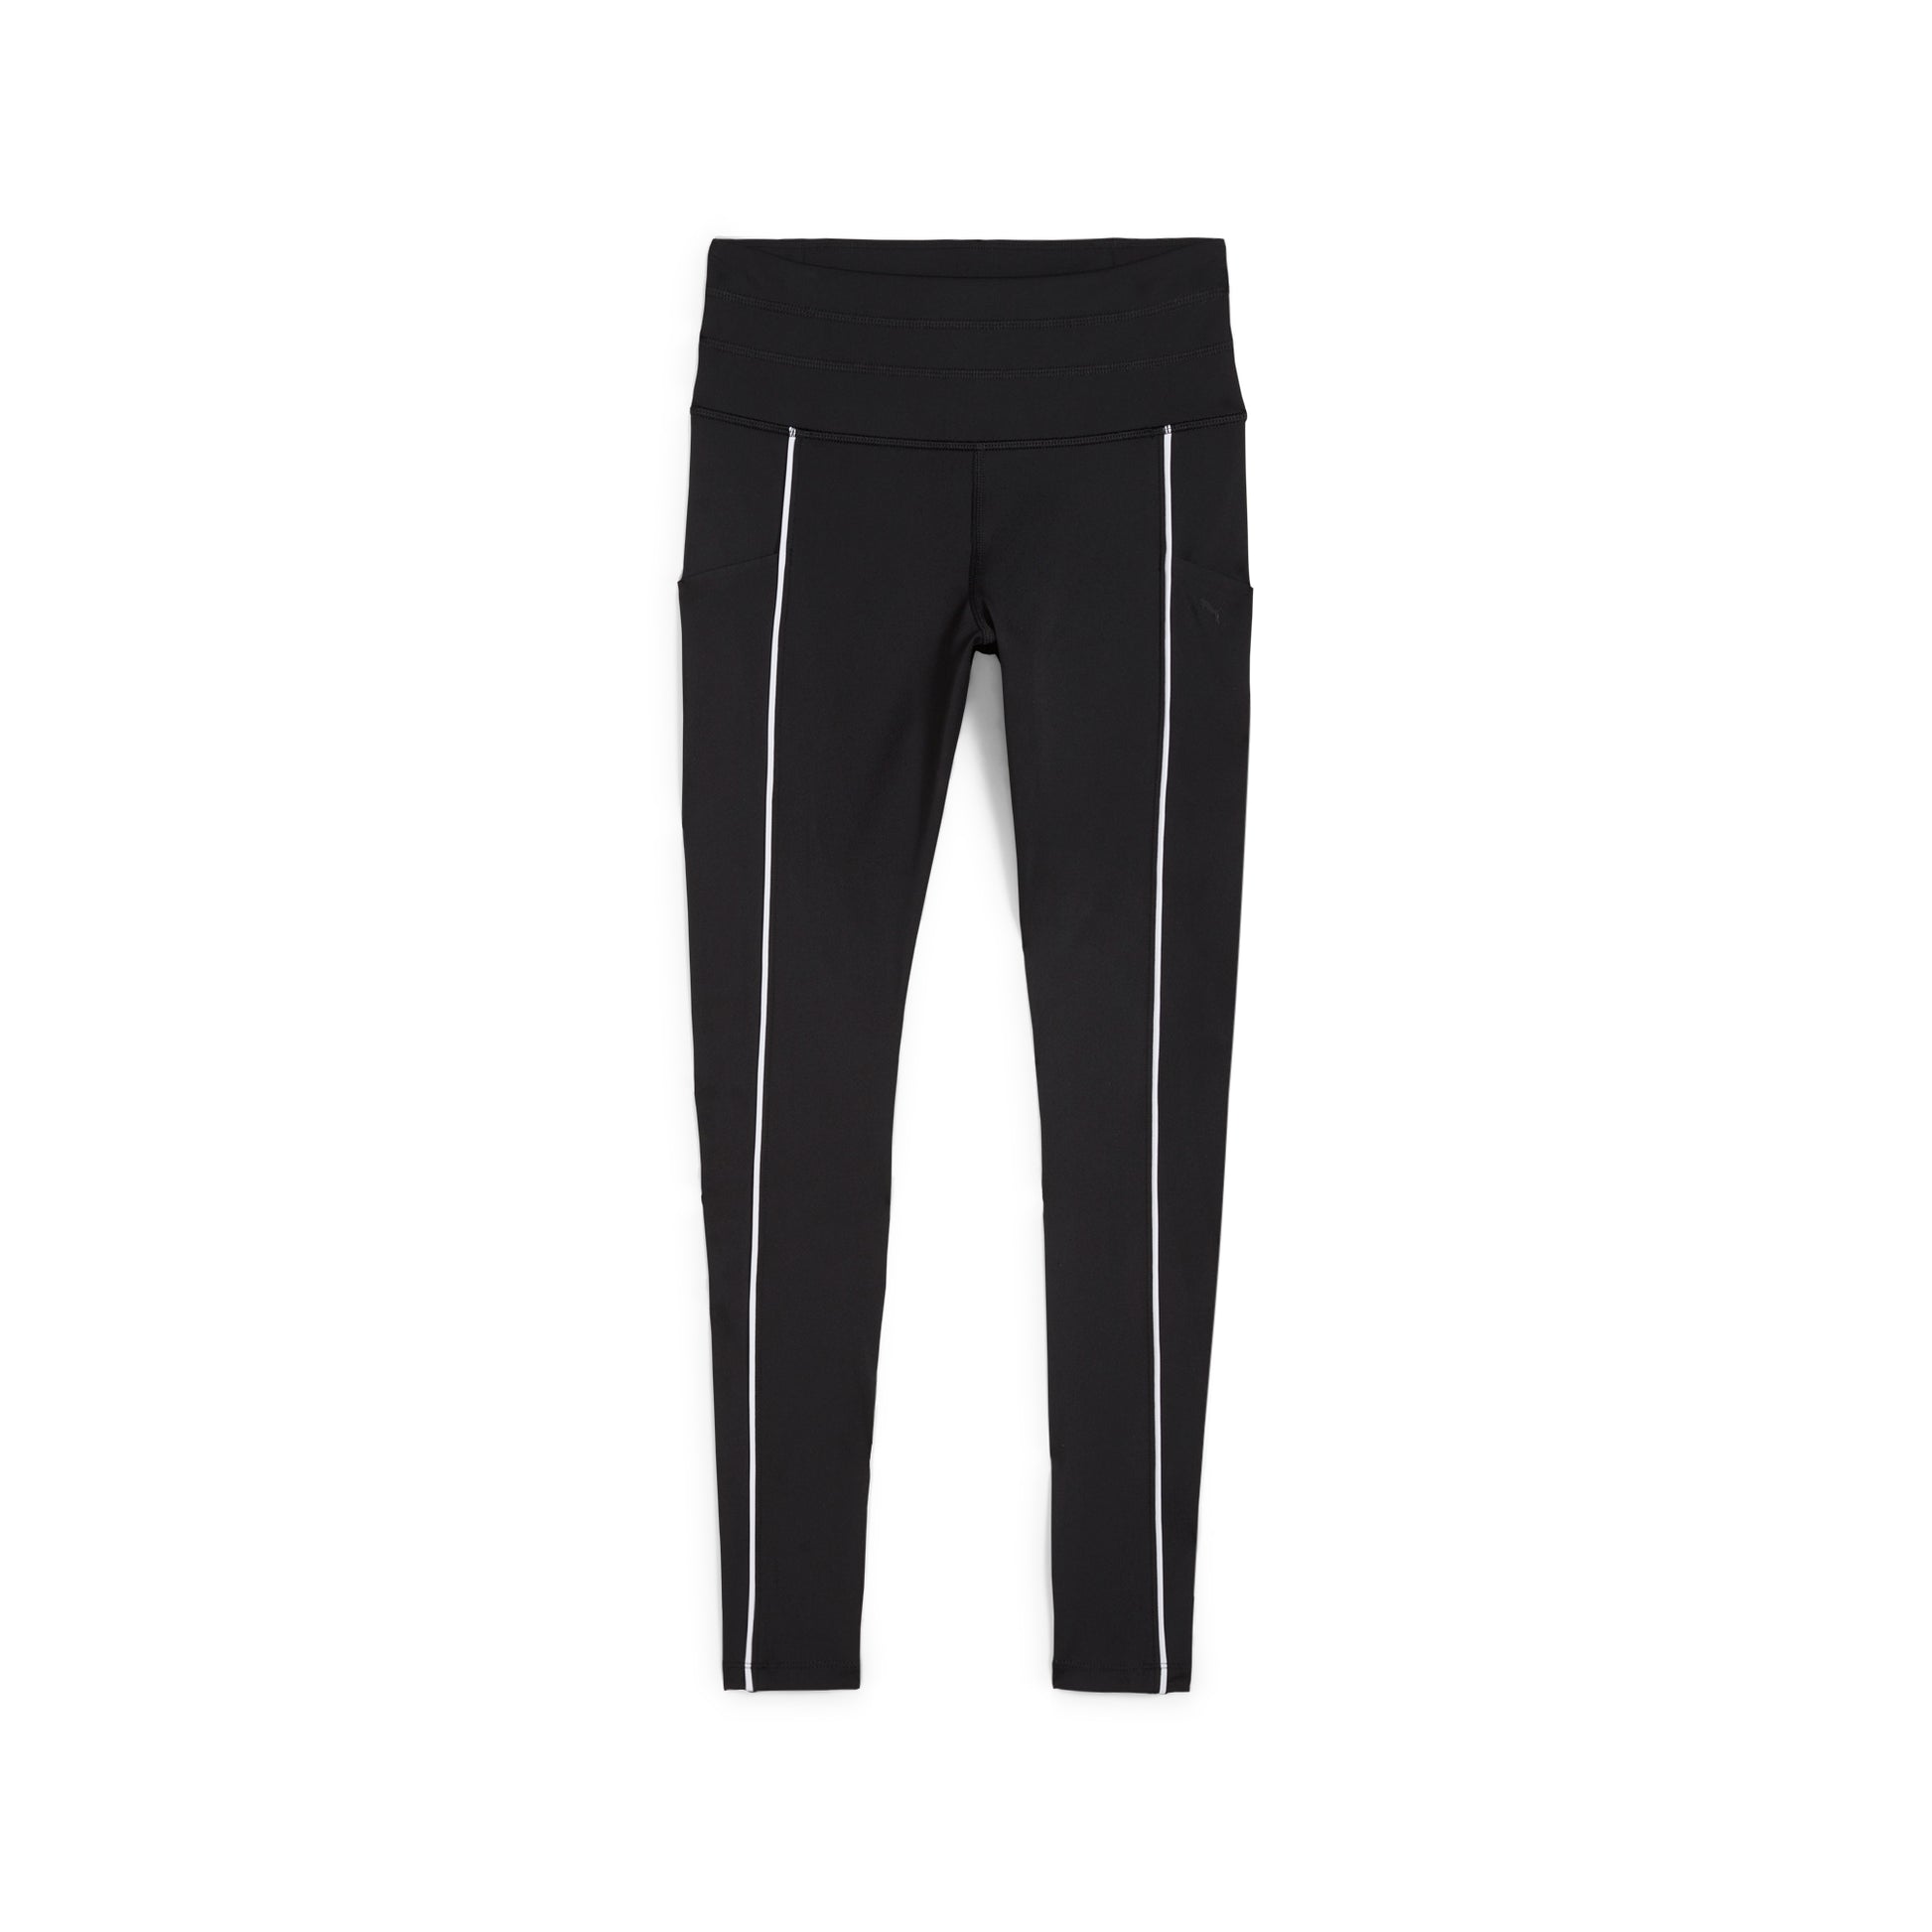 Puma Ladies You-V Leggings in Black with White Piping Detail